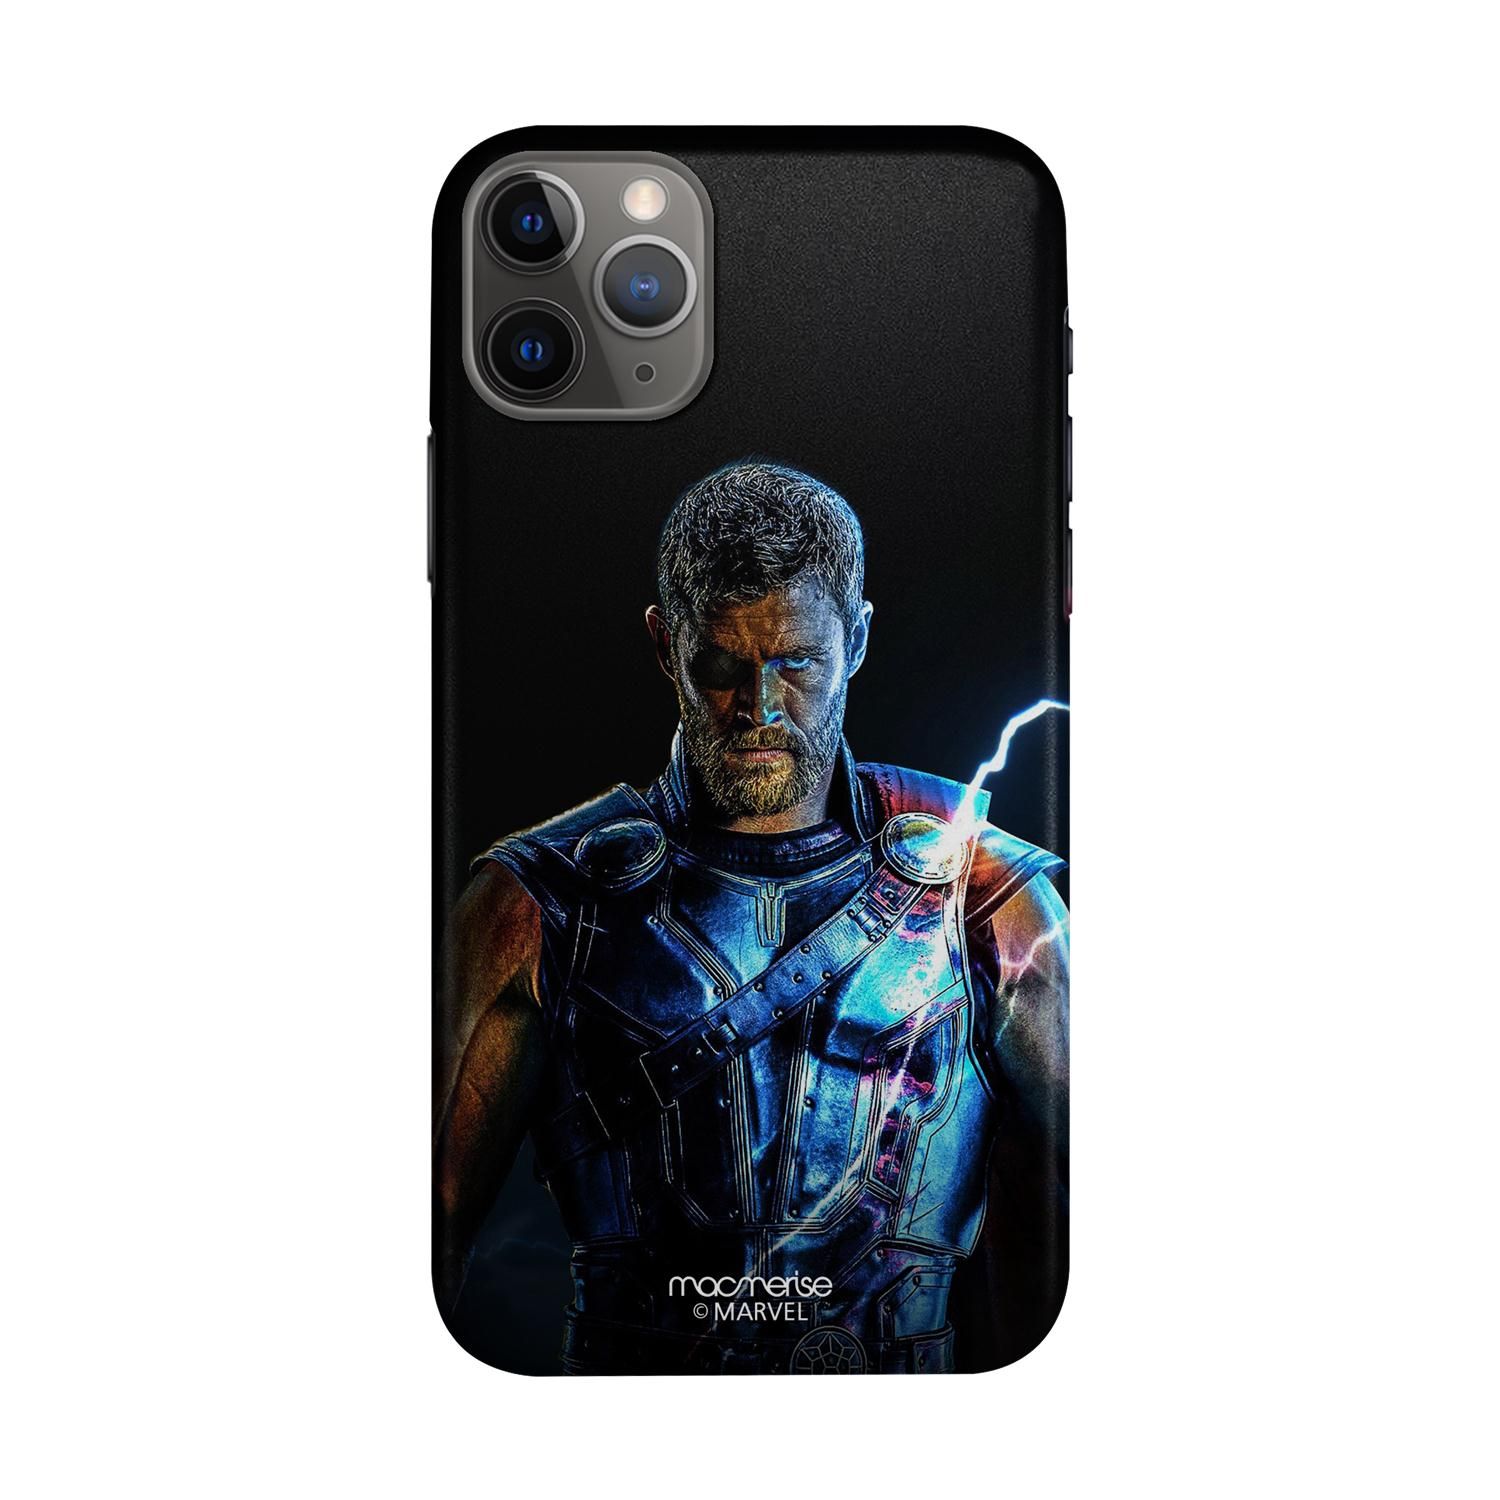 Buy The Thor Triumph - Sleek Phone Case for iPhone 11 Pro Max Online